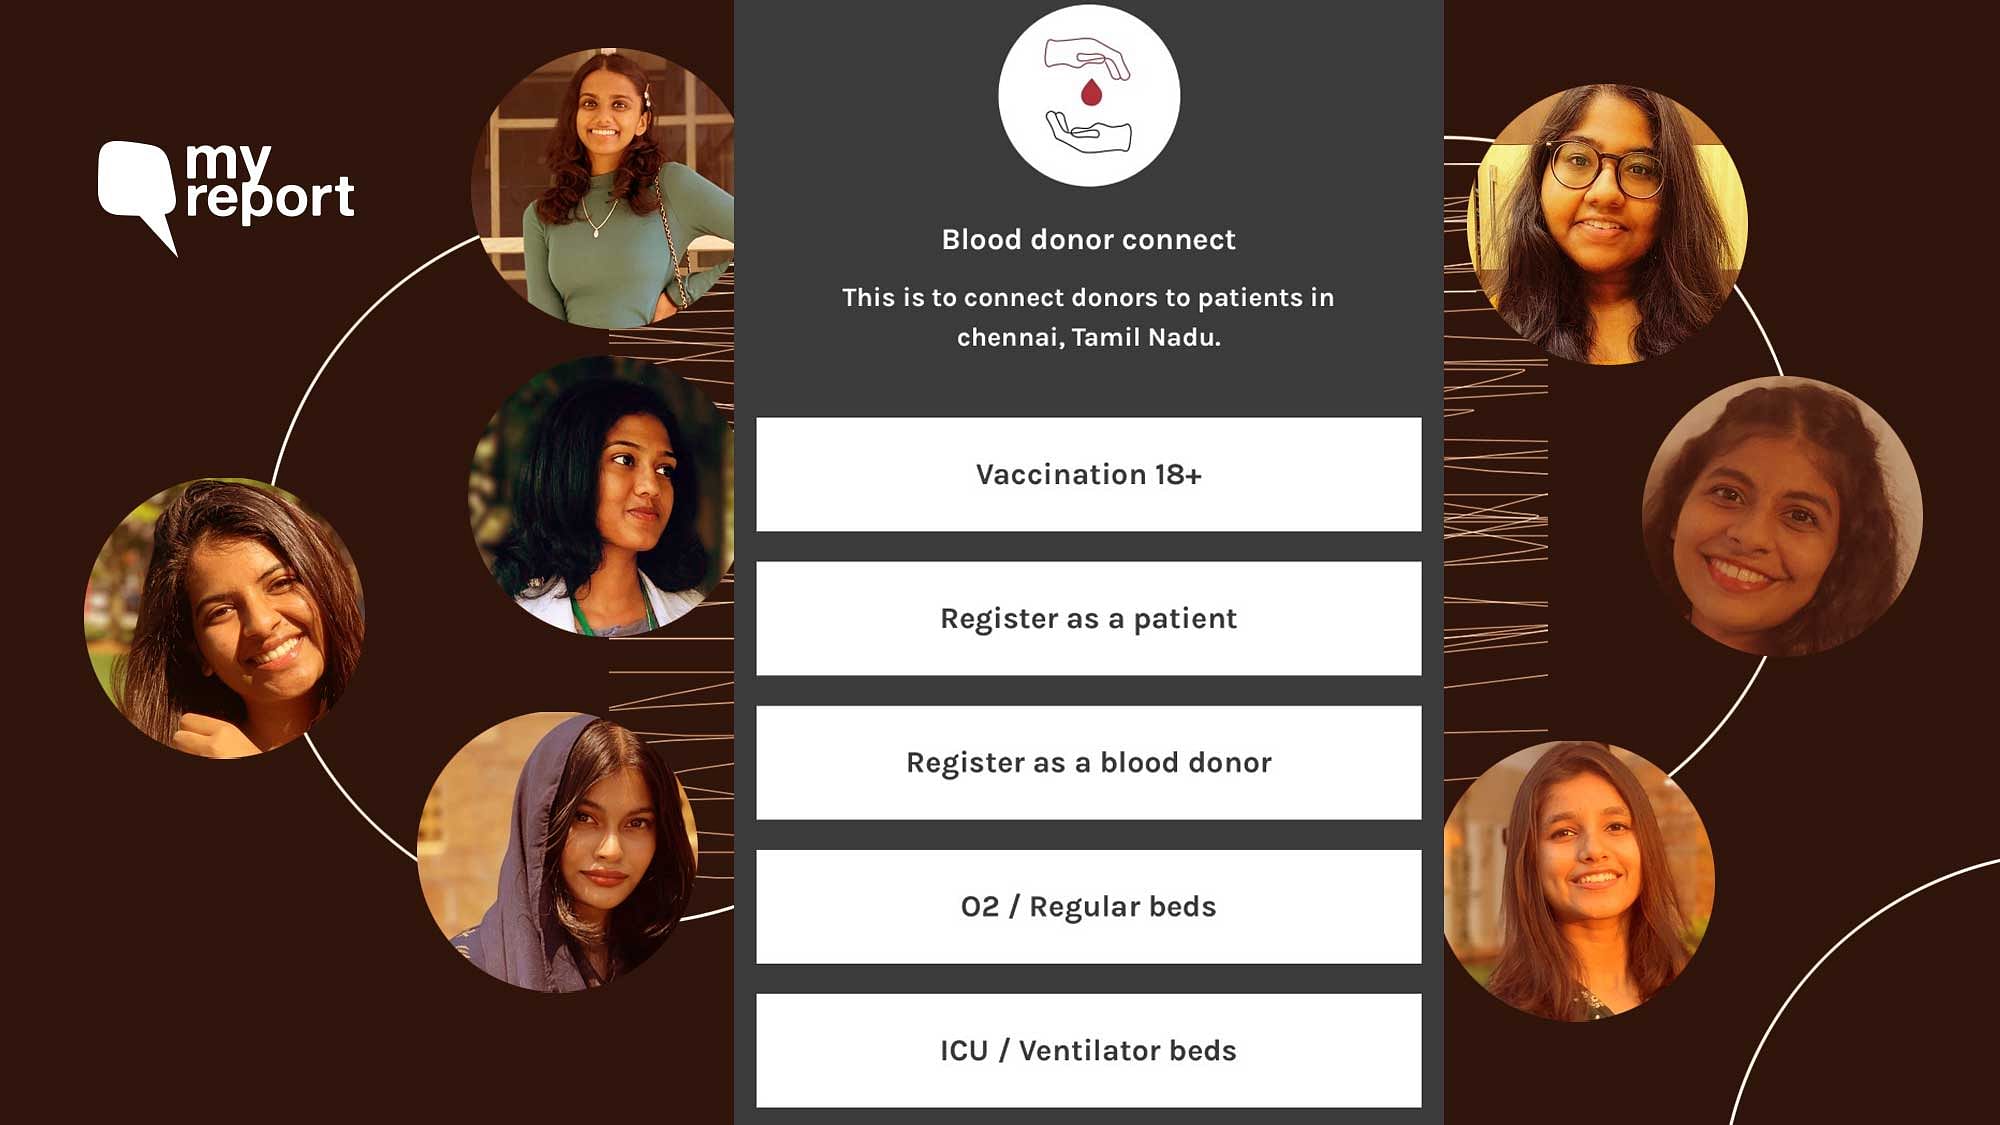 A group of students in Chennai are using Instagram and Tinder to combat the increasing need for blood in the city.